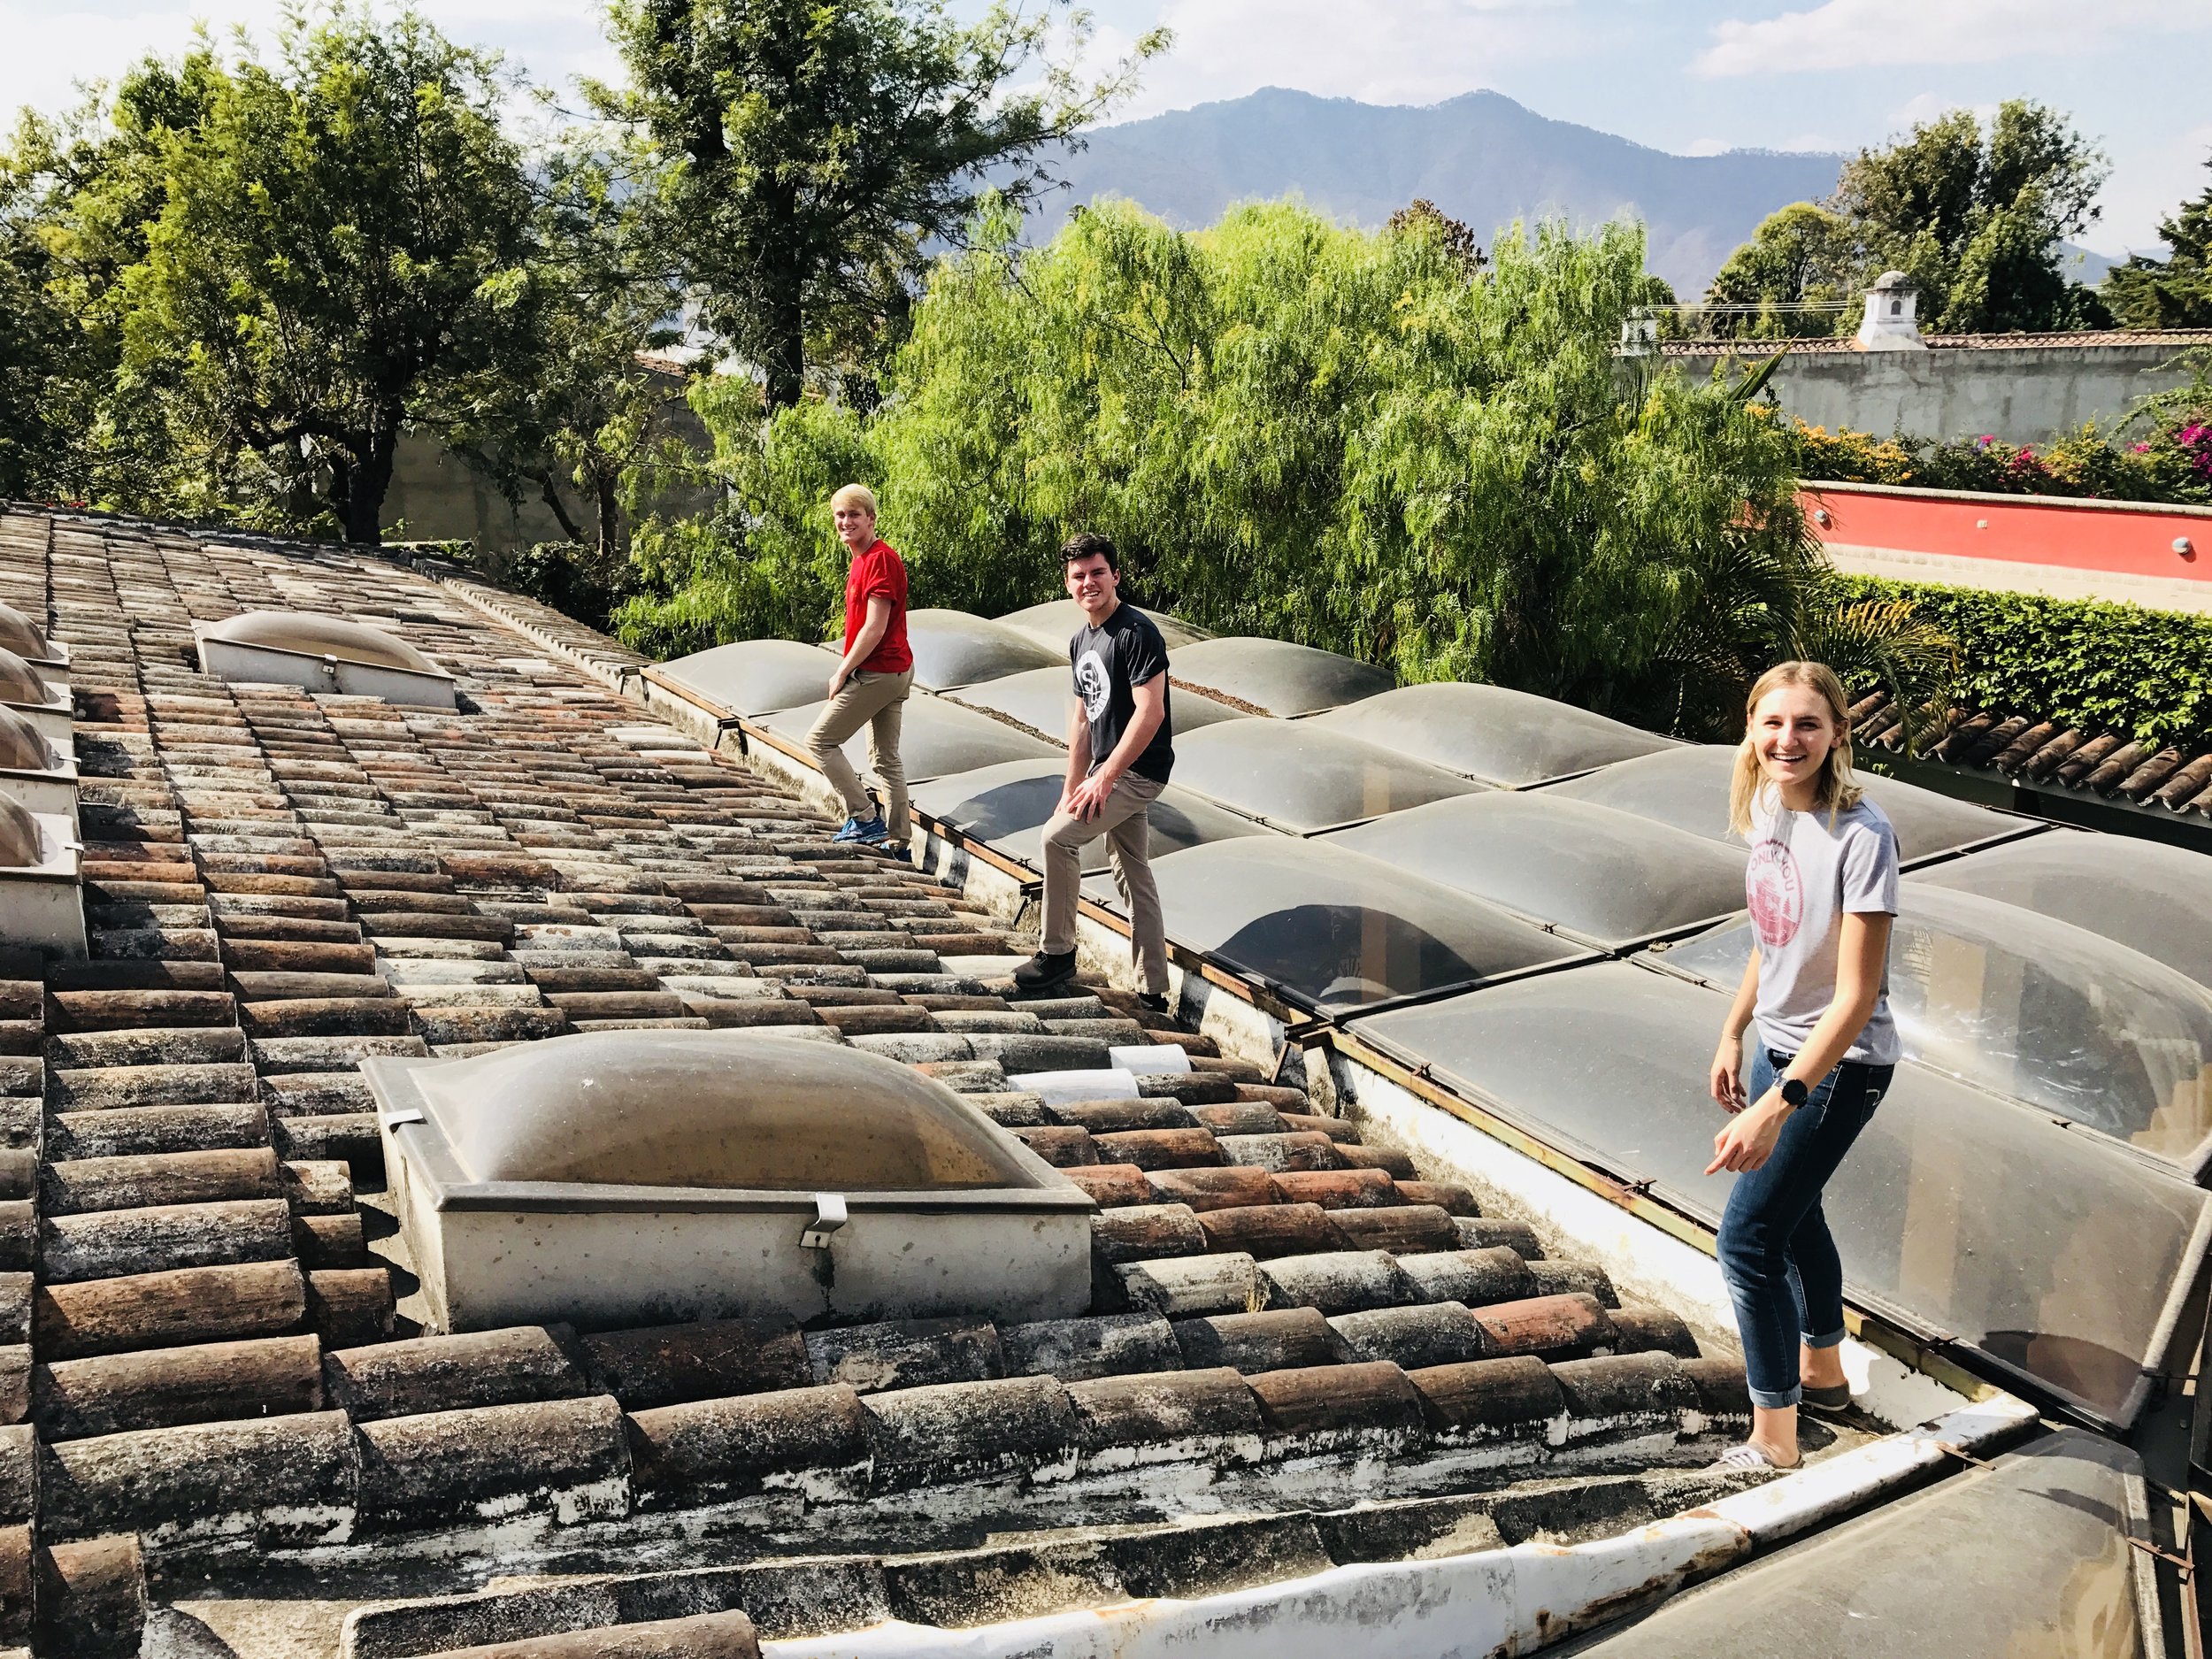 Taking roof measurements on the February 2018 assessment trip at the Common Hope campus. 